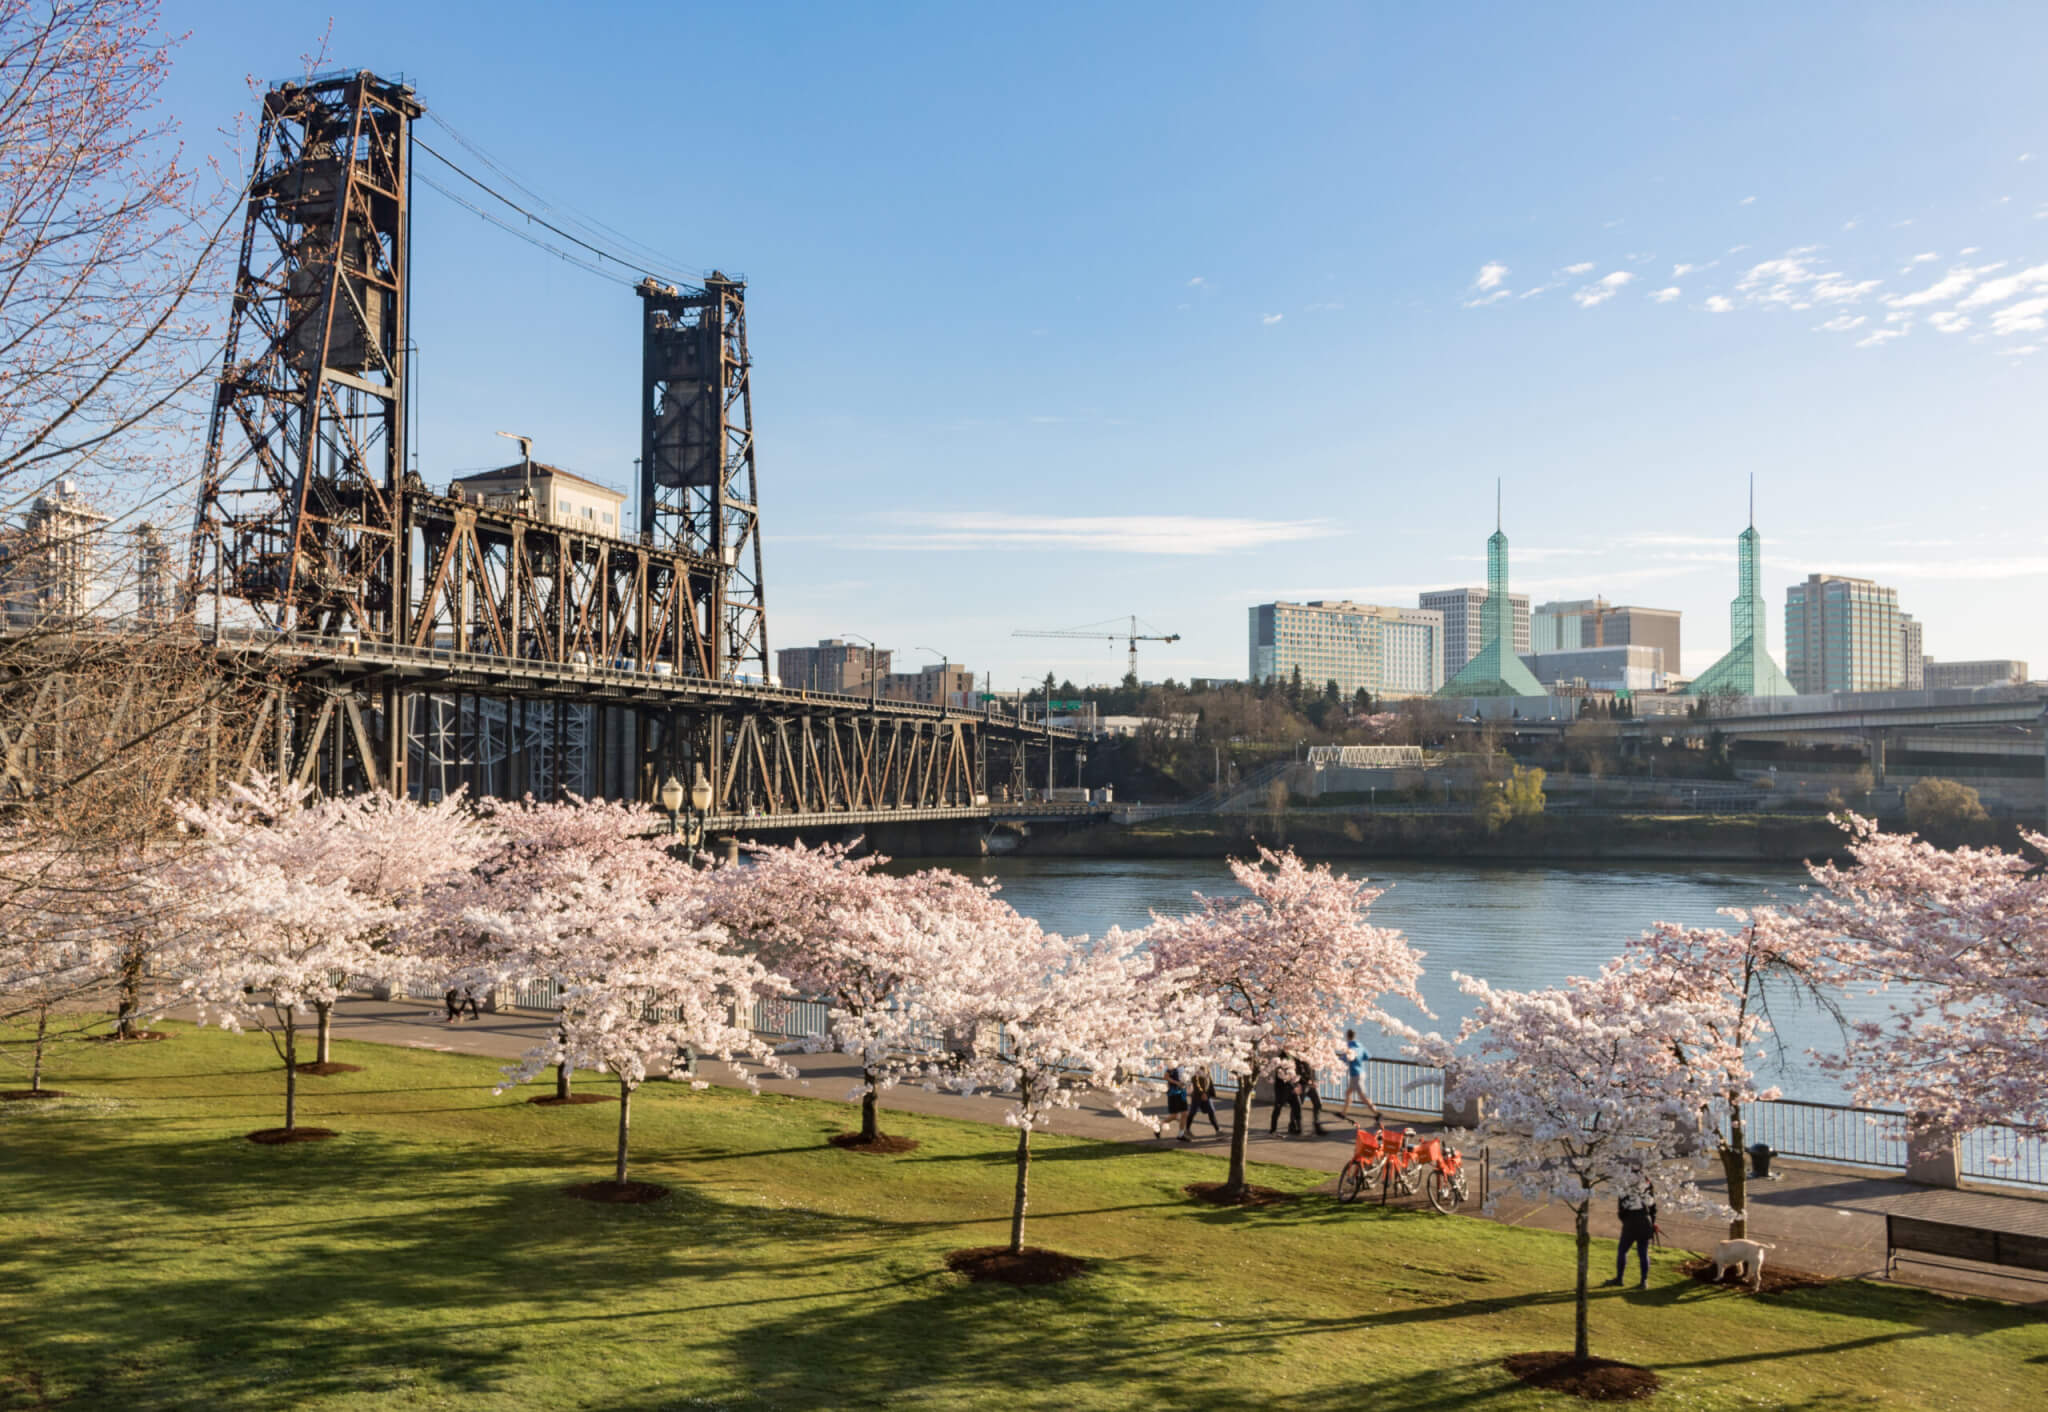 Cherry blossoms on Portland Waterfront, with Steel Bridge and Portland Convention Center, Oregon